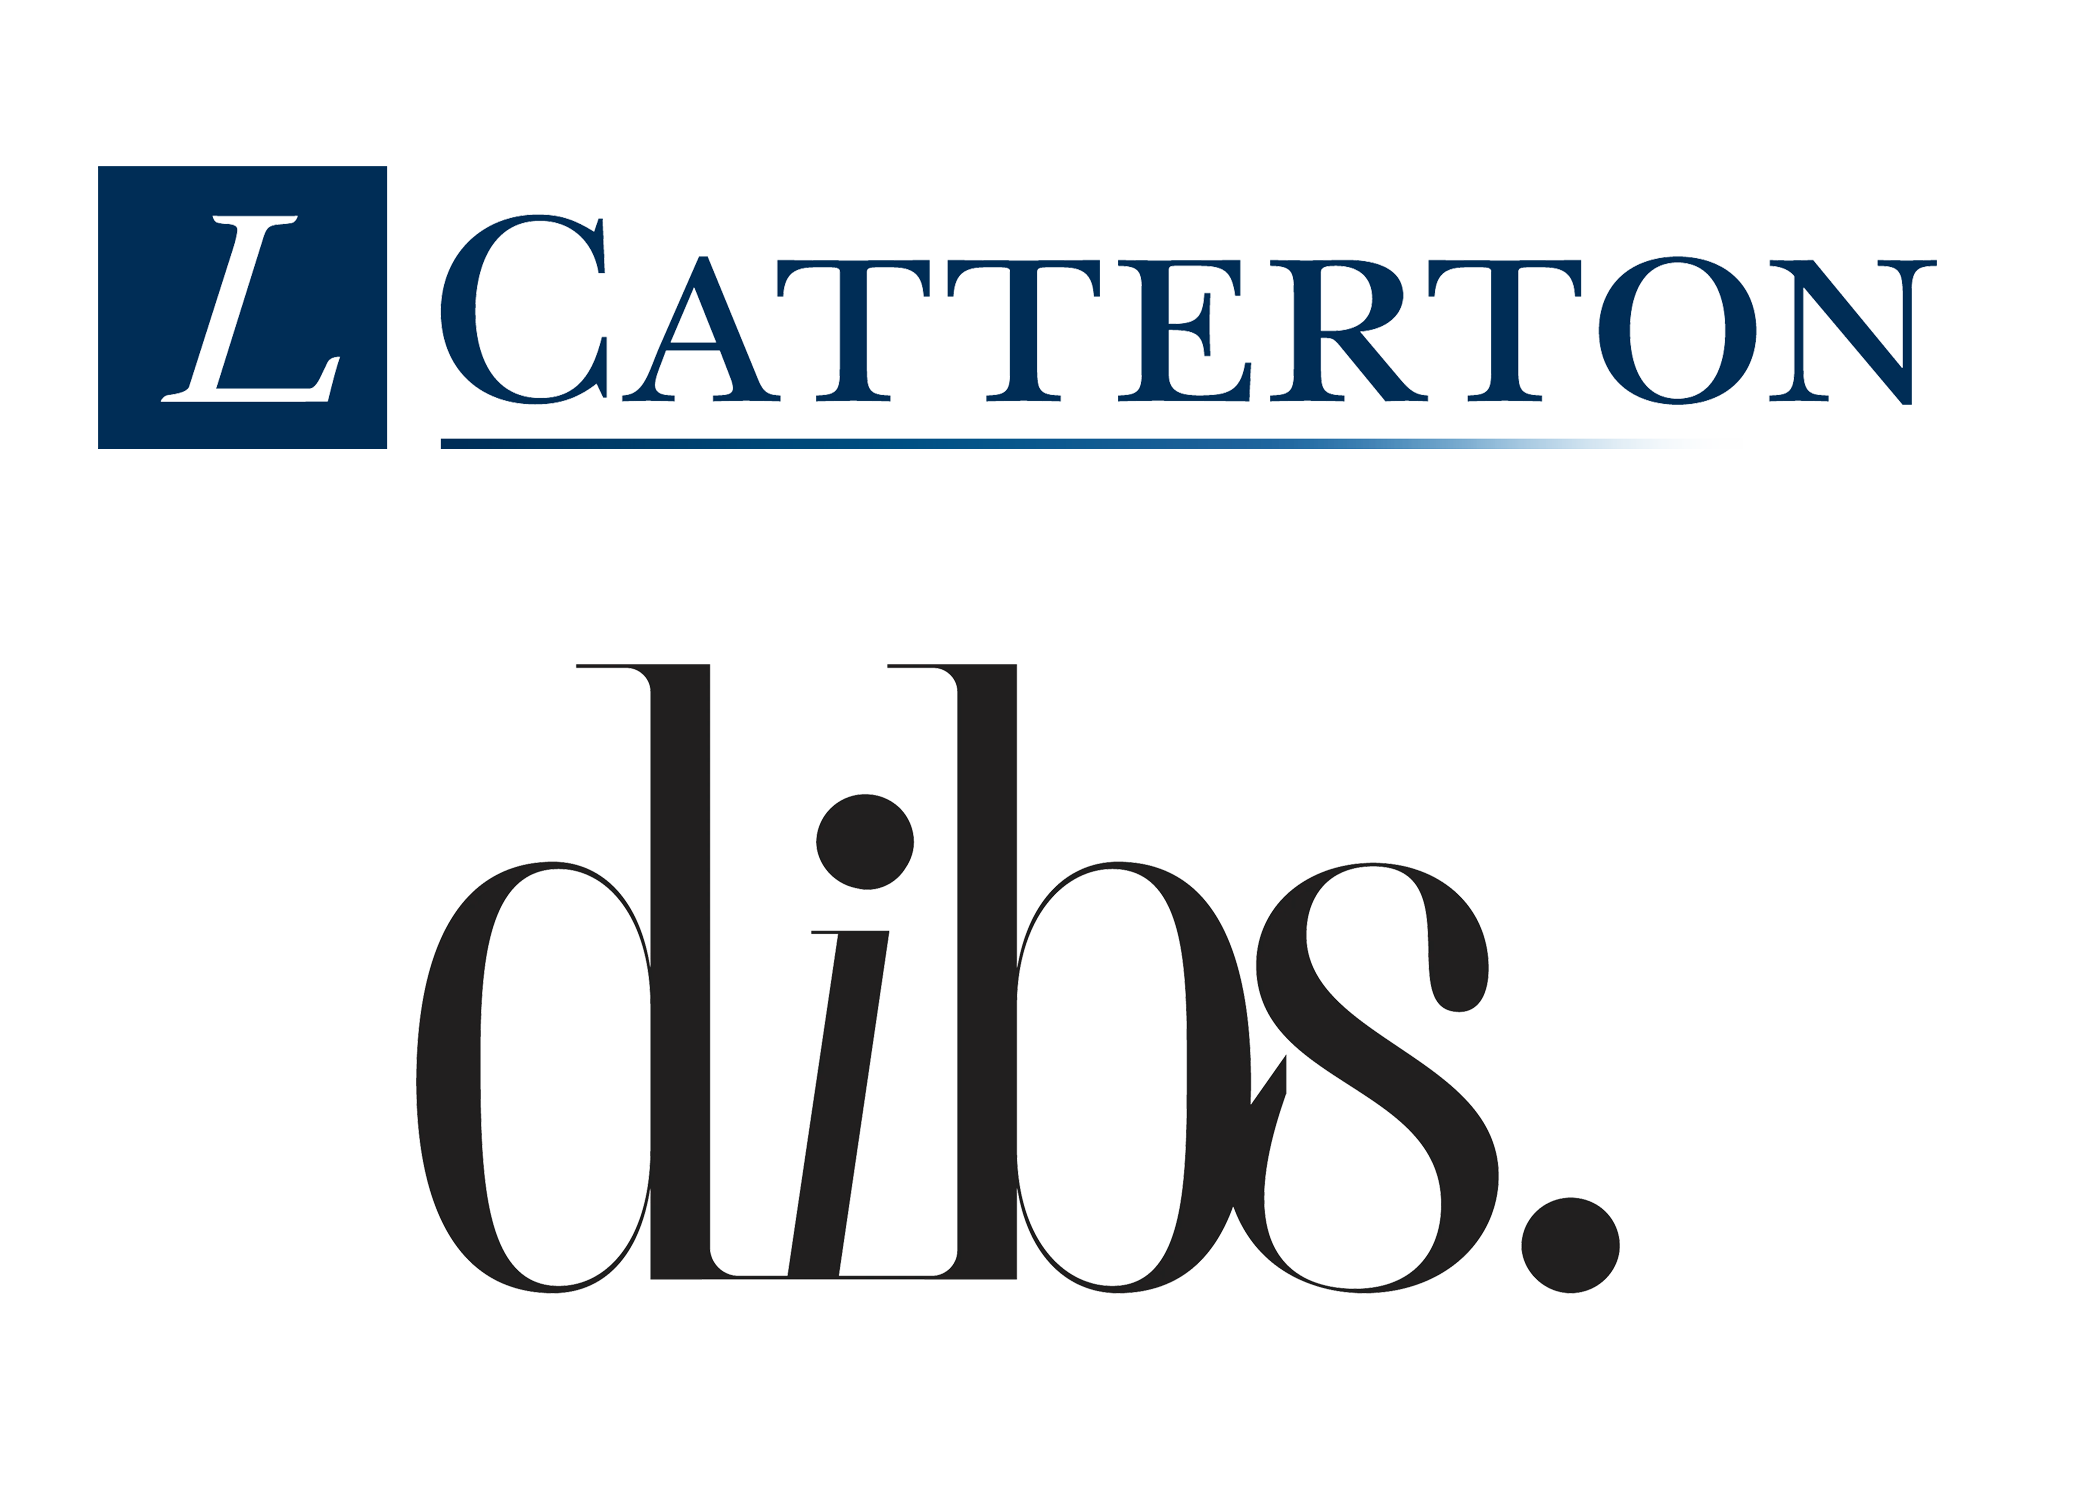 L Capital partnering with Catterton to create a global equity firm